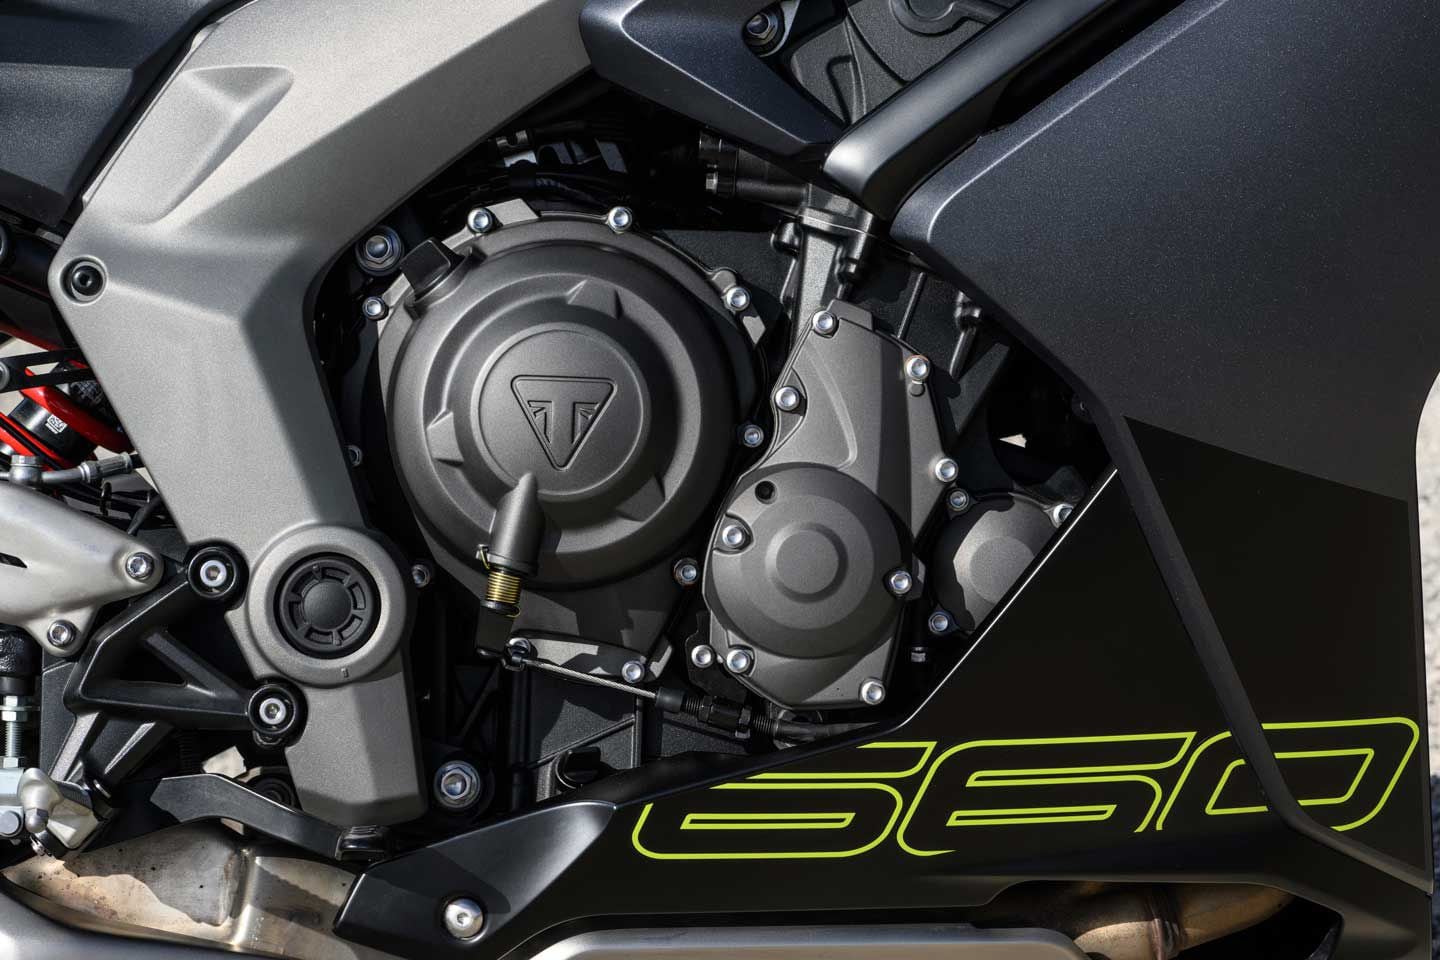 The 660cc inline three in the Daytona produces a claimed 94 horsepower.